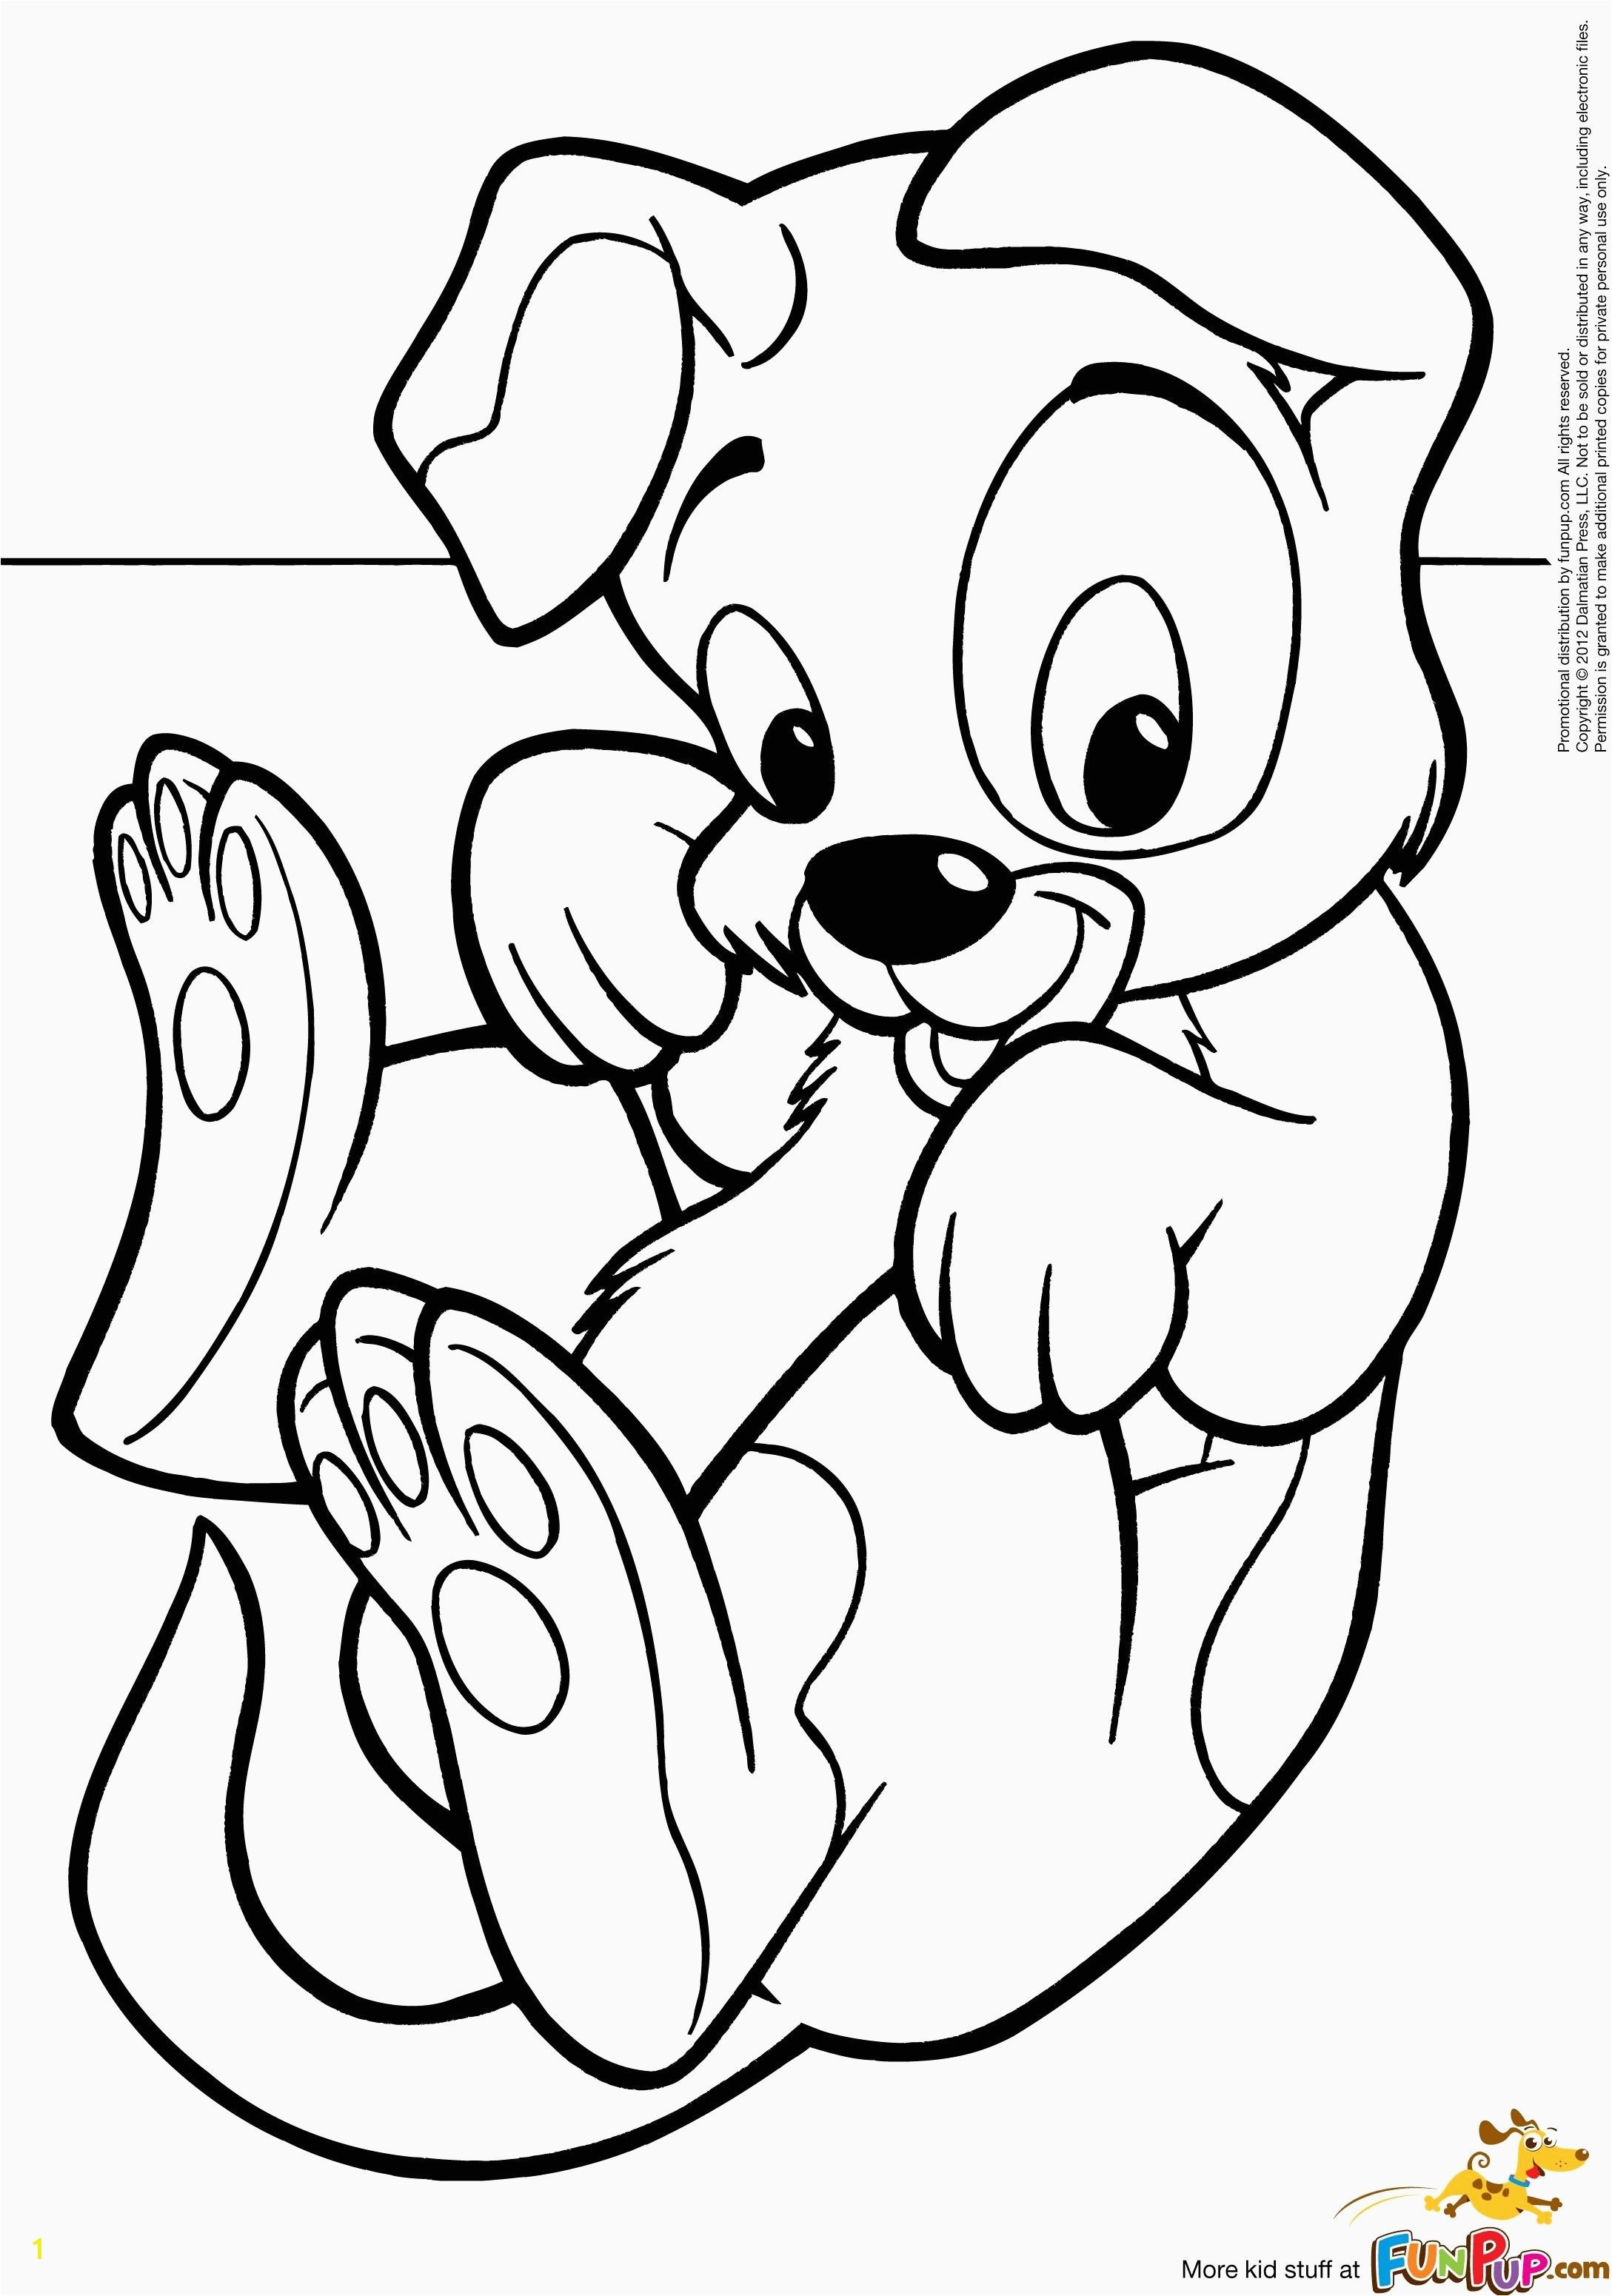 Cute Puppy Love Coloring Pages Unique Puppy Coloring Pages Free